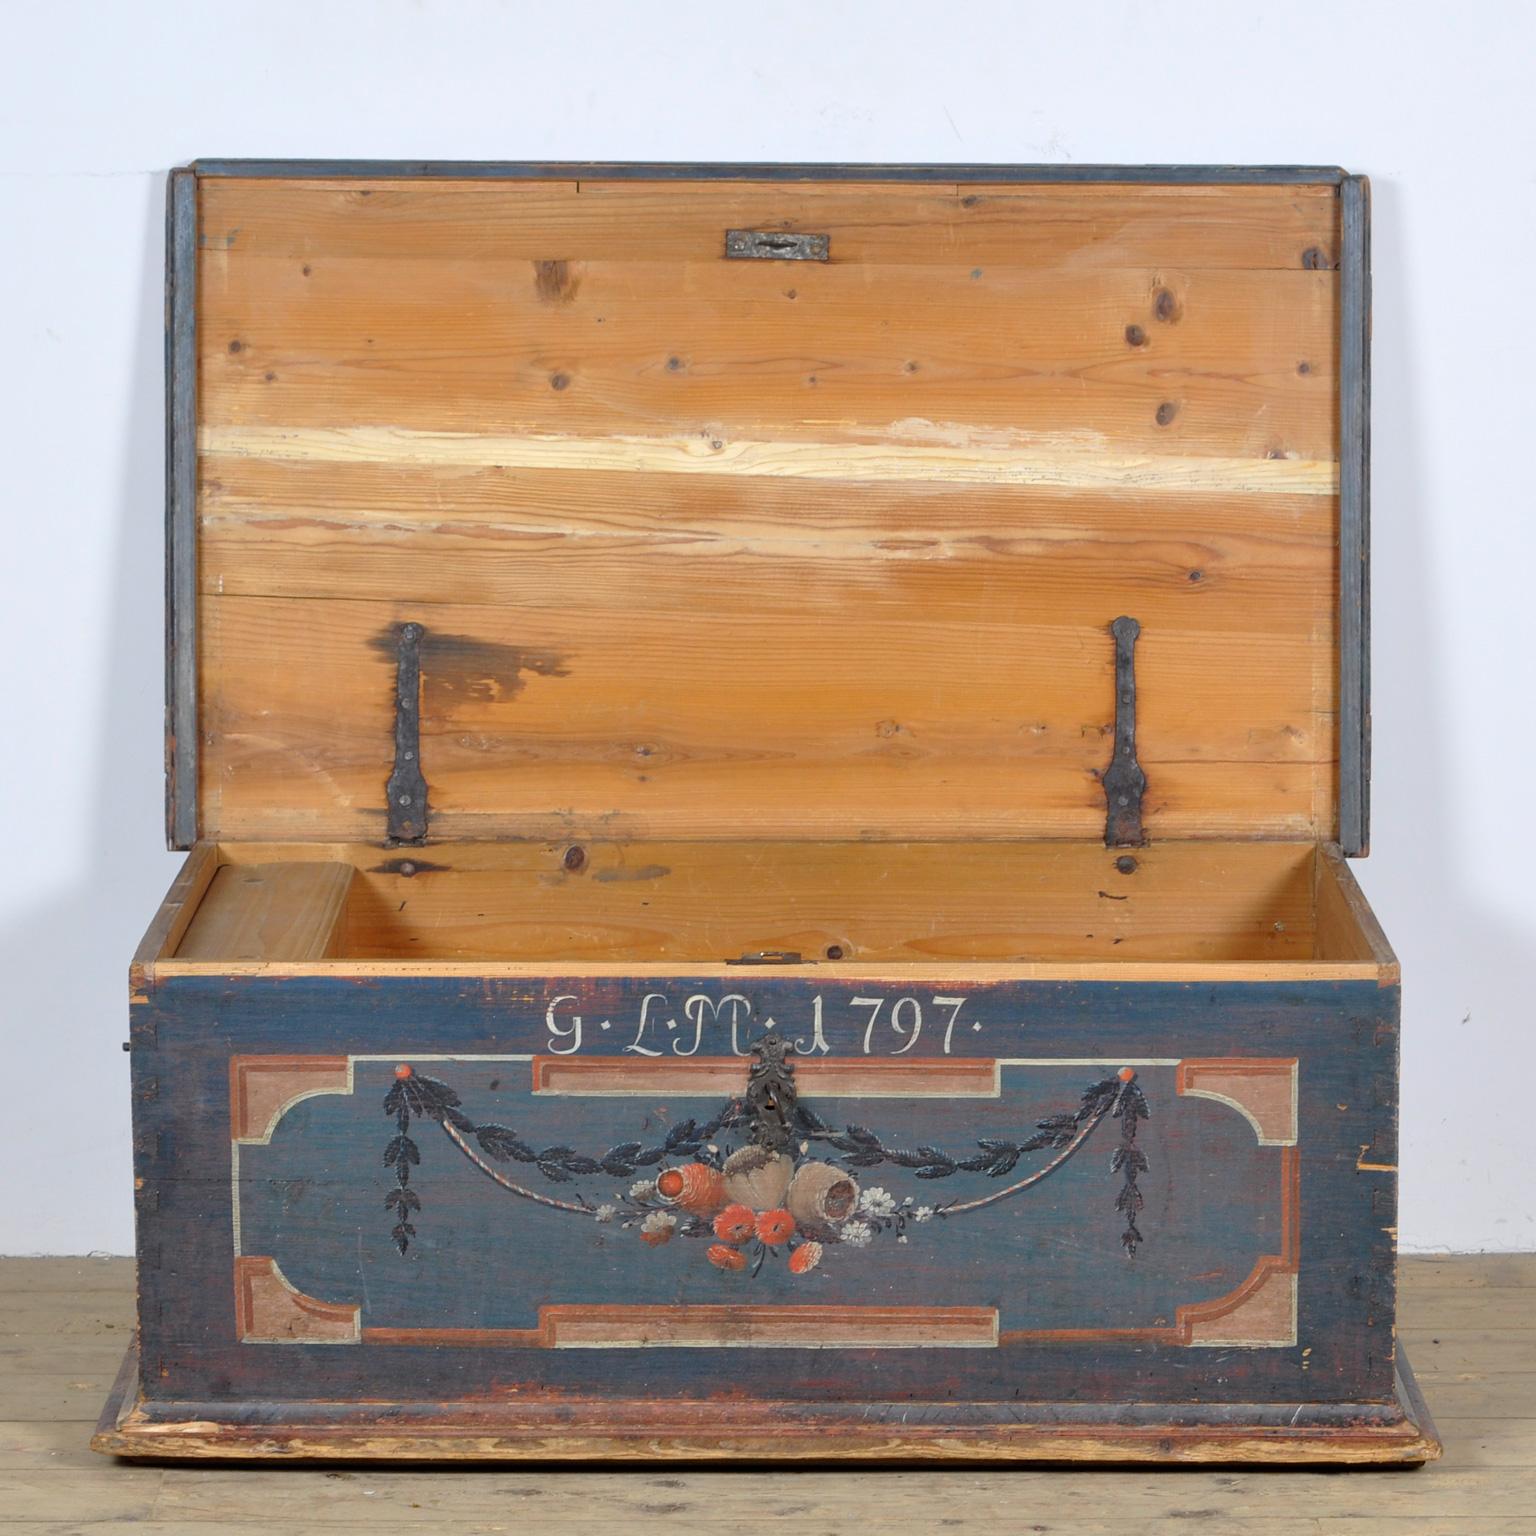 German Wedding Chest From 1797 For Sale